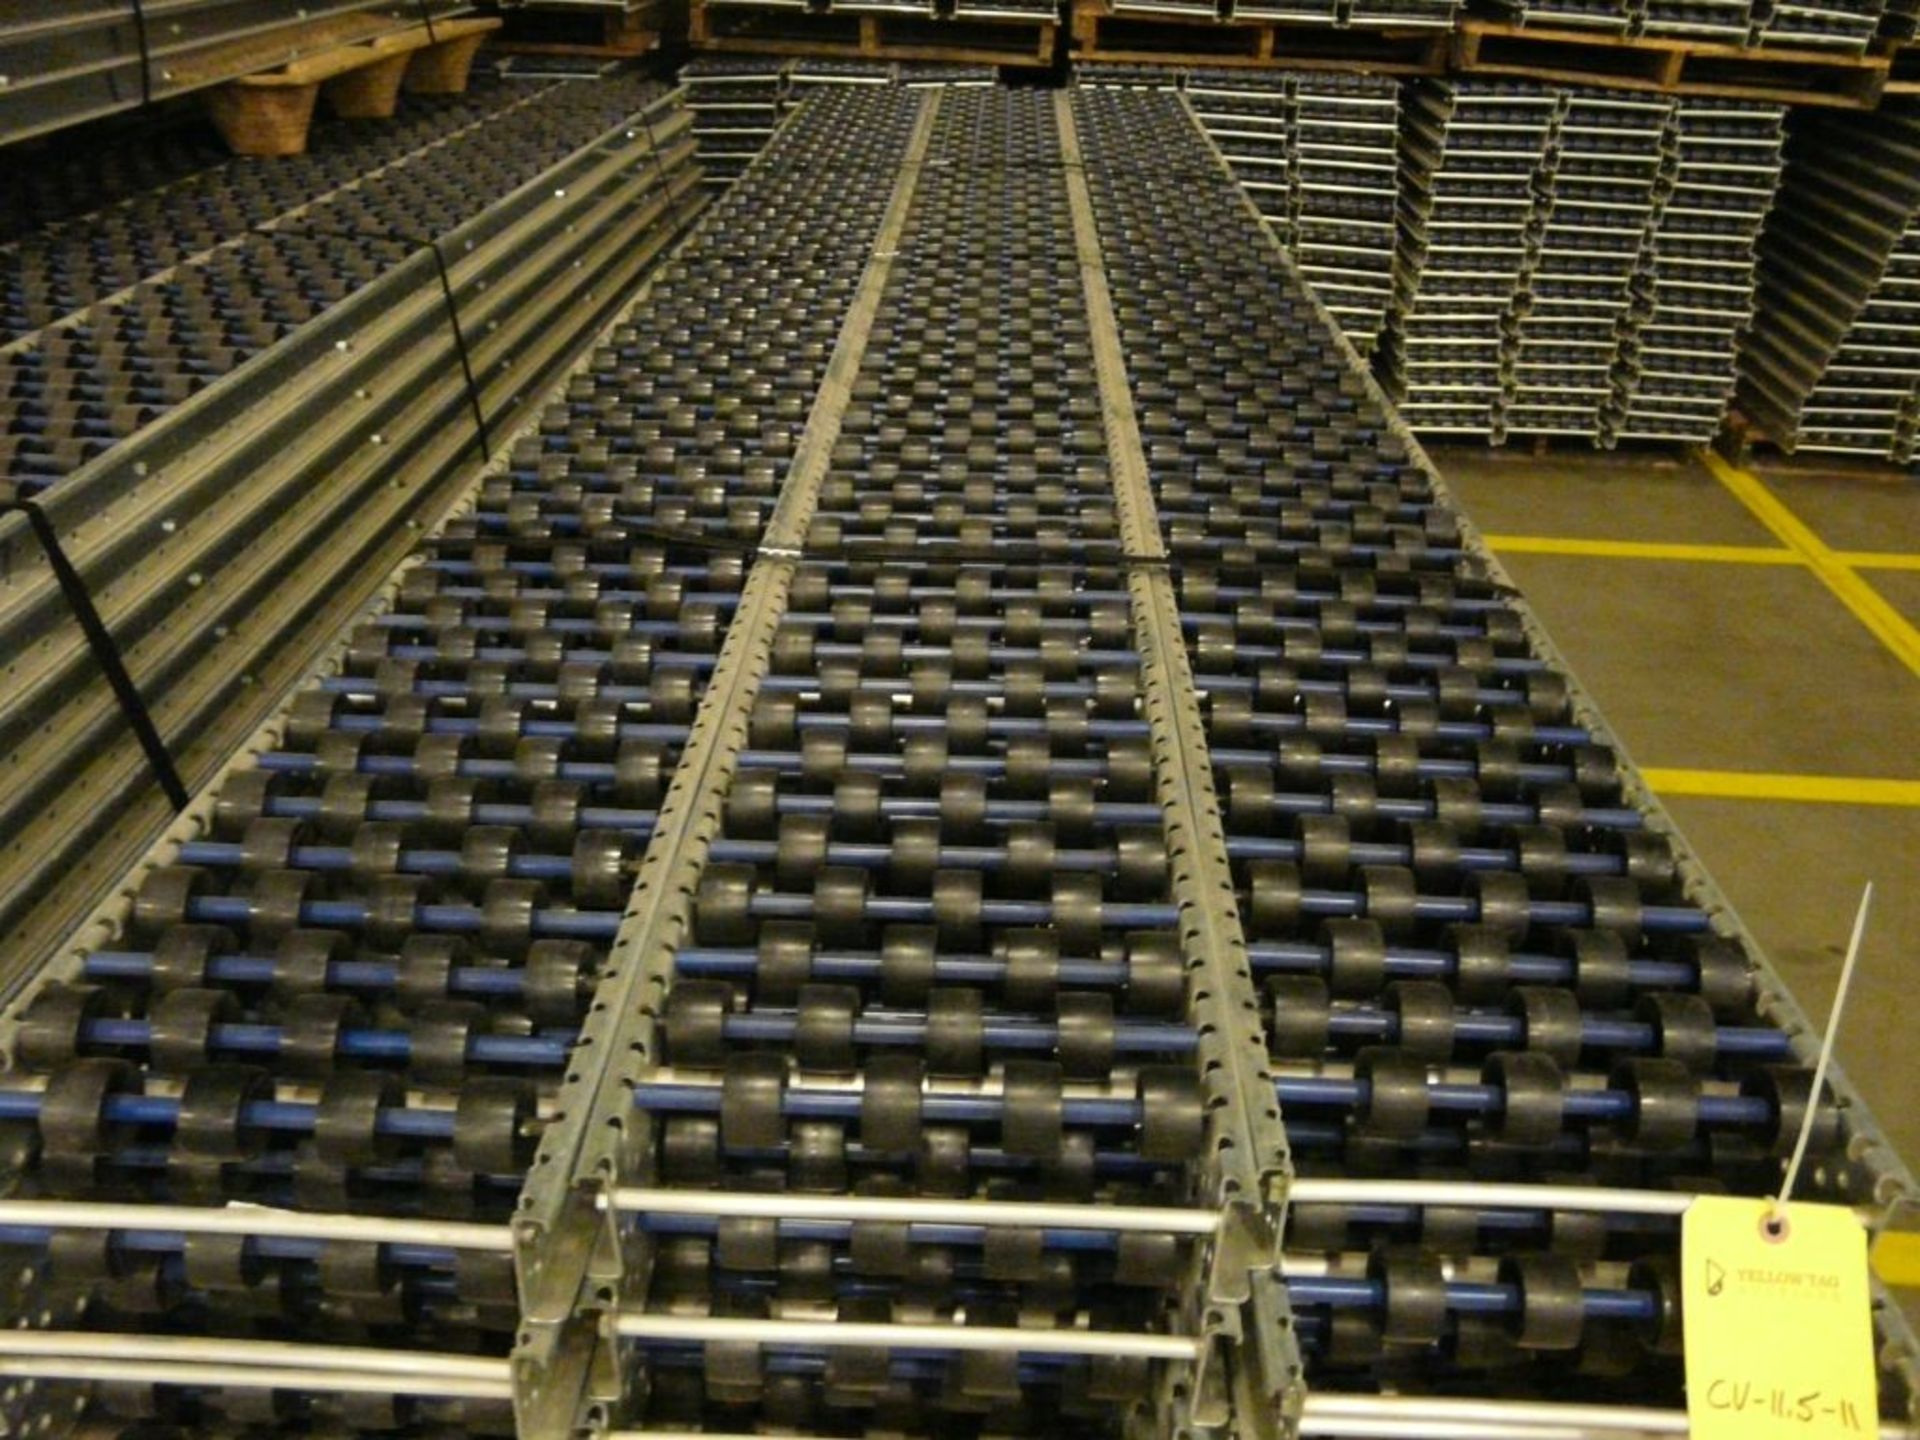 Lot of (90) SpanTrack Wheelbed Carton Flow Conveyors - 11.5'L x 11"W; Tag: 223555 - $30 Lot - Image 3 of 4